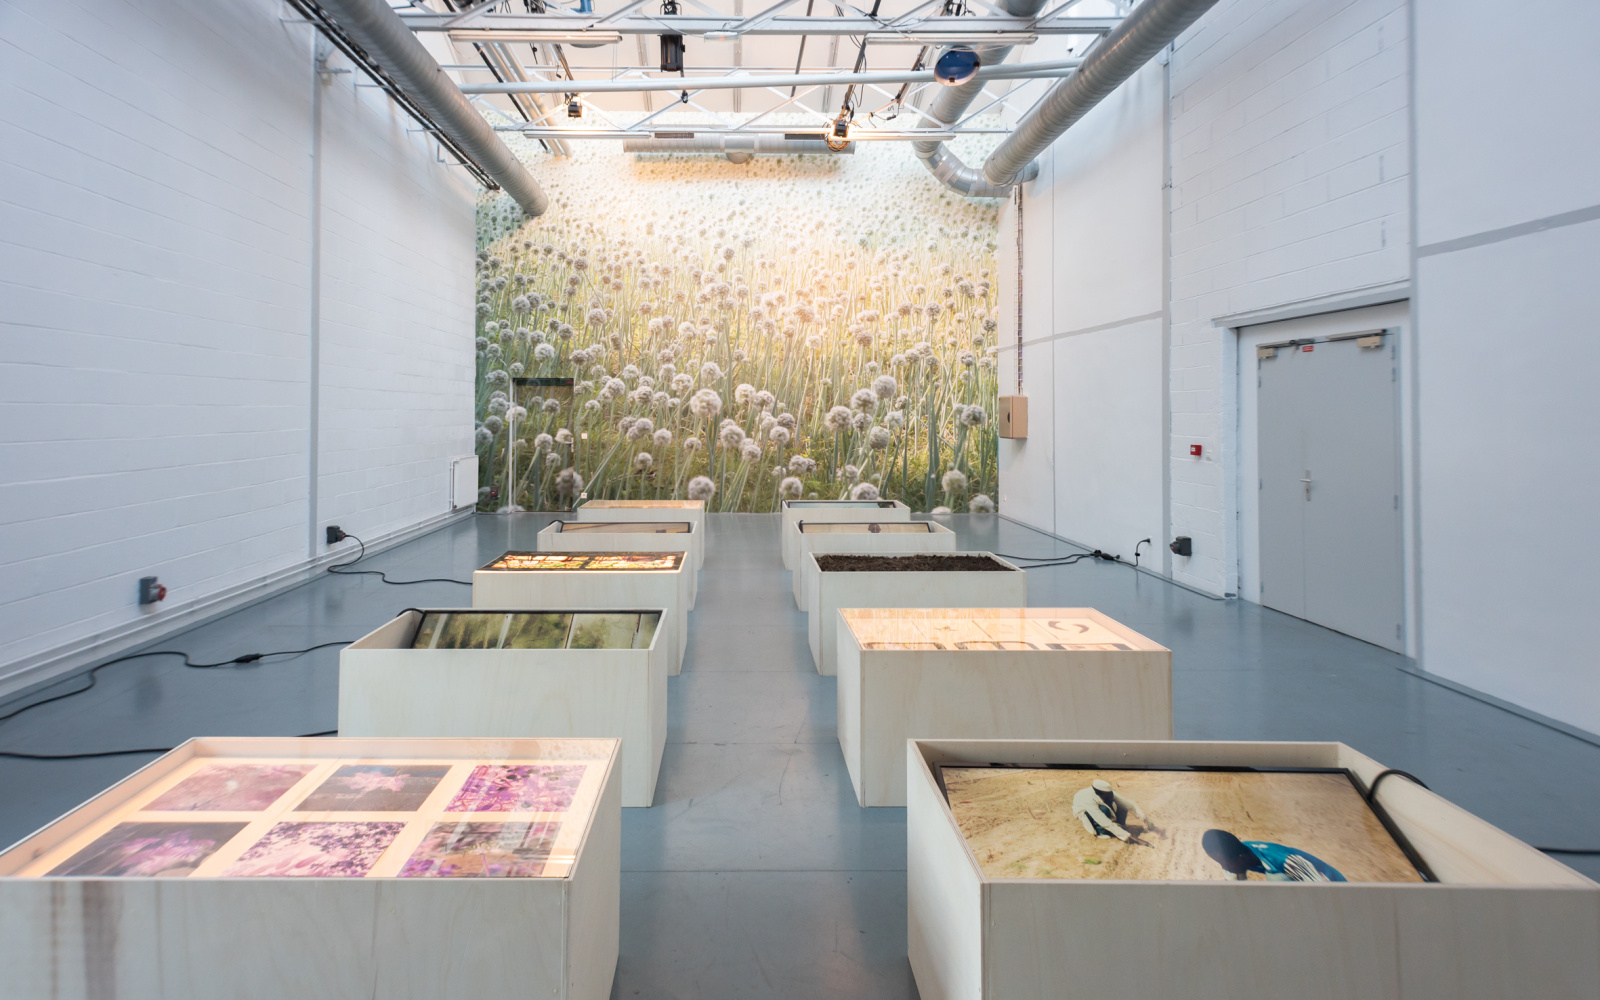 Photo of an exhibition room with a large photo print of a meadow in the background and white pedestals with exhibition objects in the foreground.